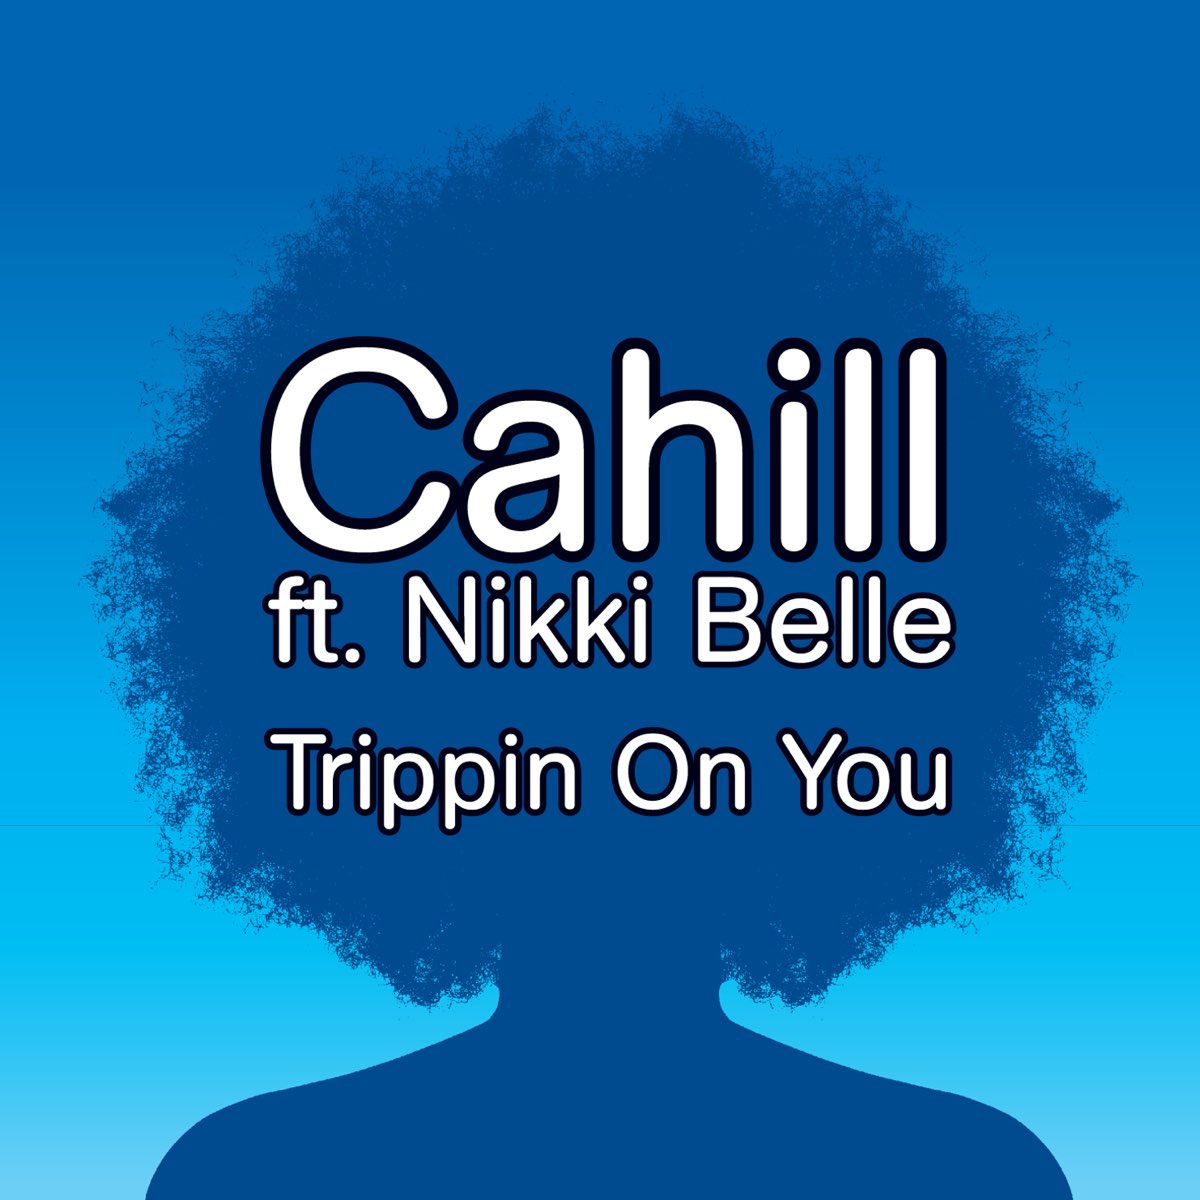 Cahill ft. featuring Nikki Belle Trippin on You cover artwork